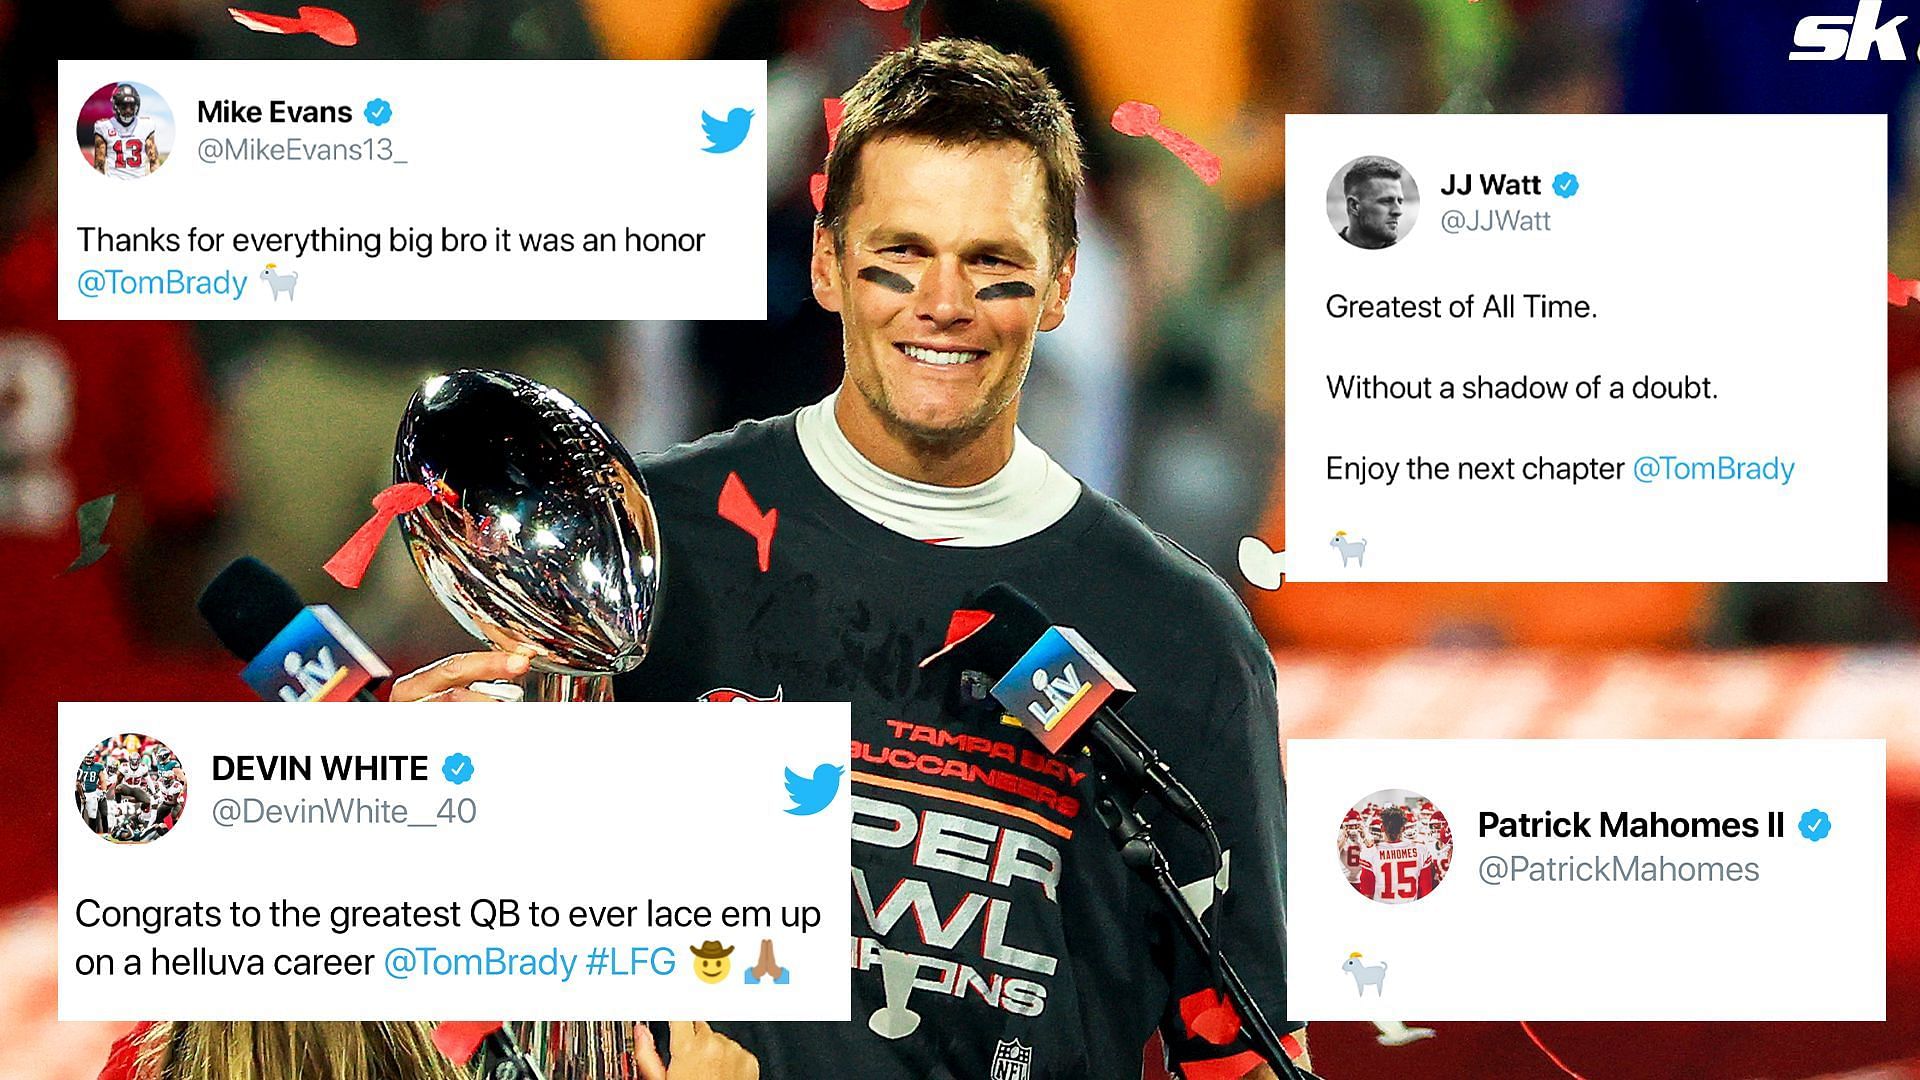 Tributes pour in for Tom Brady, followinge retirement